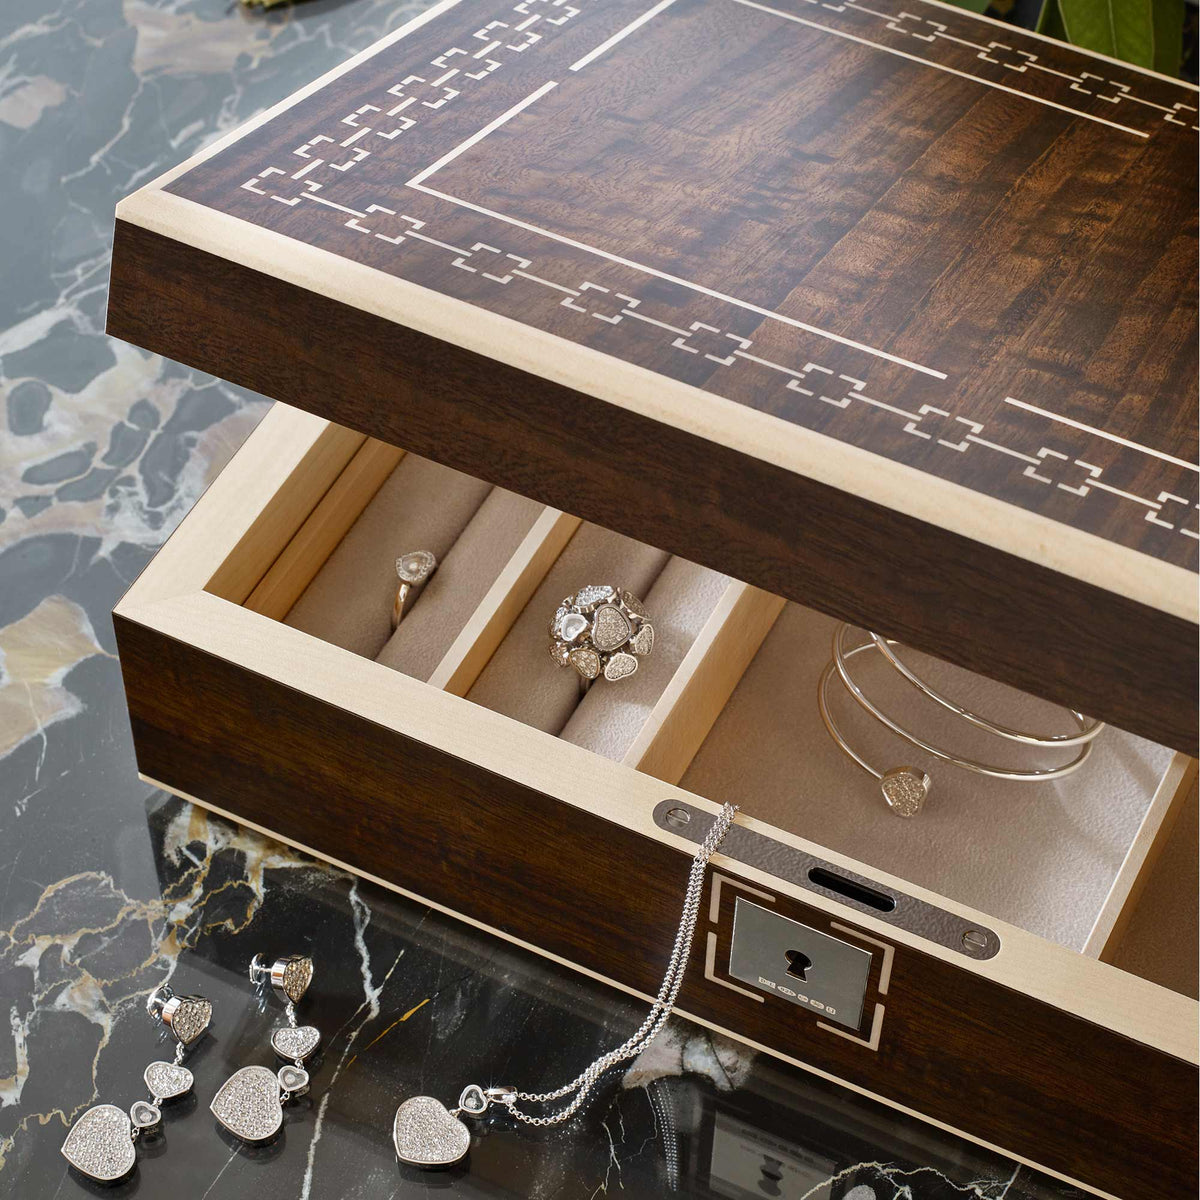 L-Chain Box | Luxury Home Accessories & Gifts | LINLEY